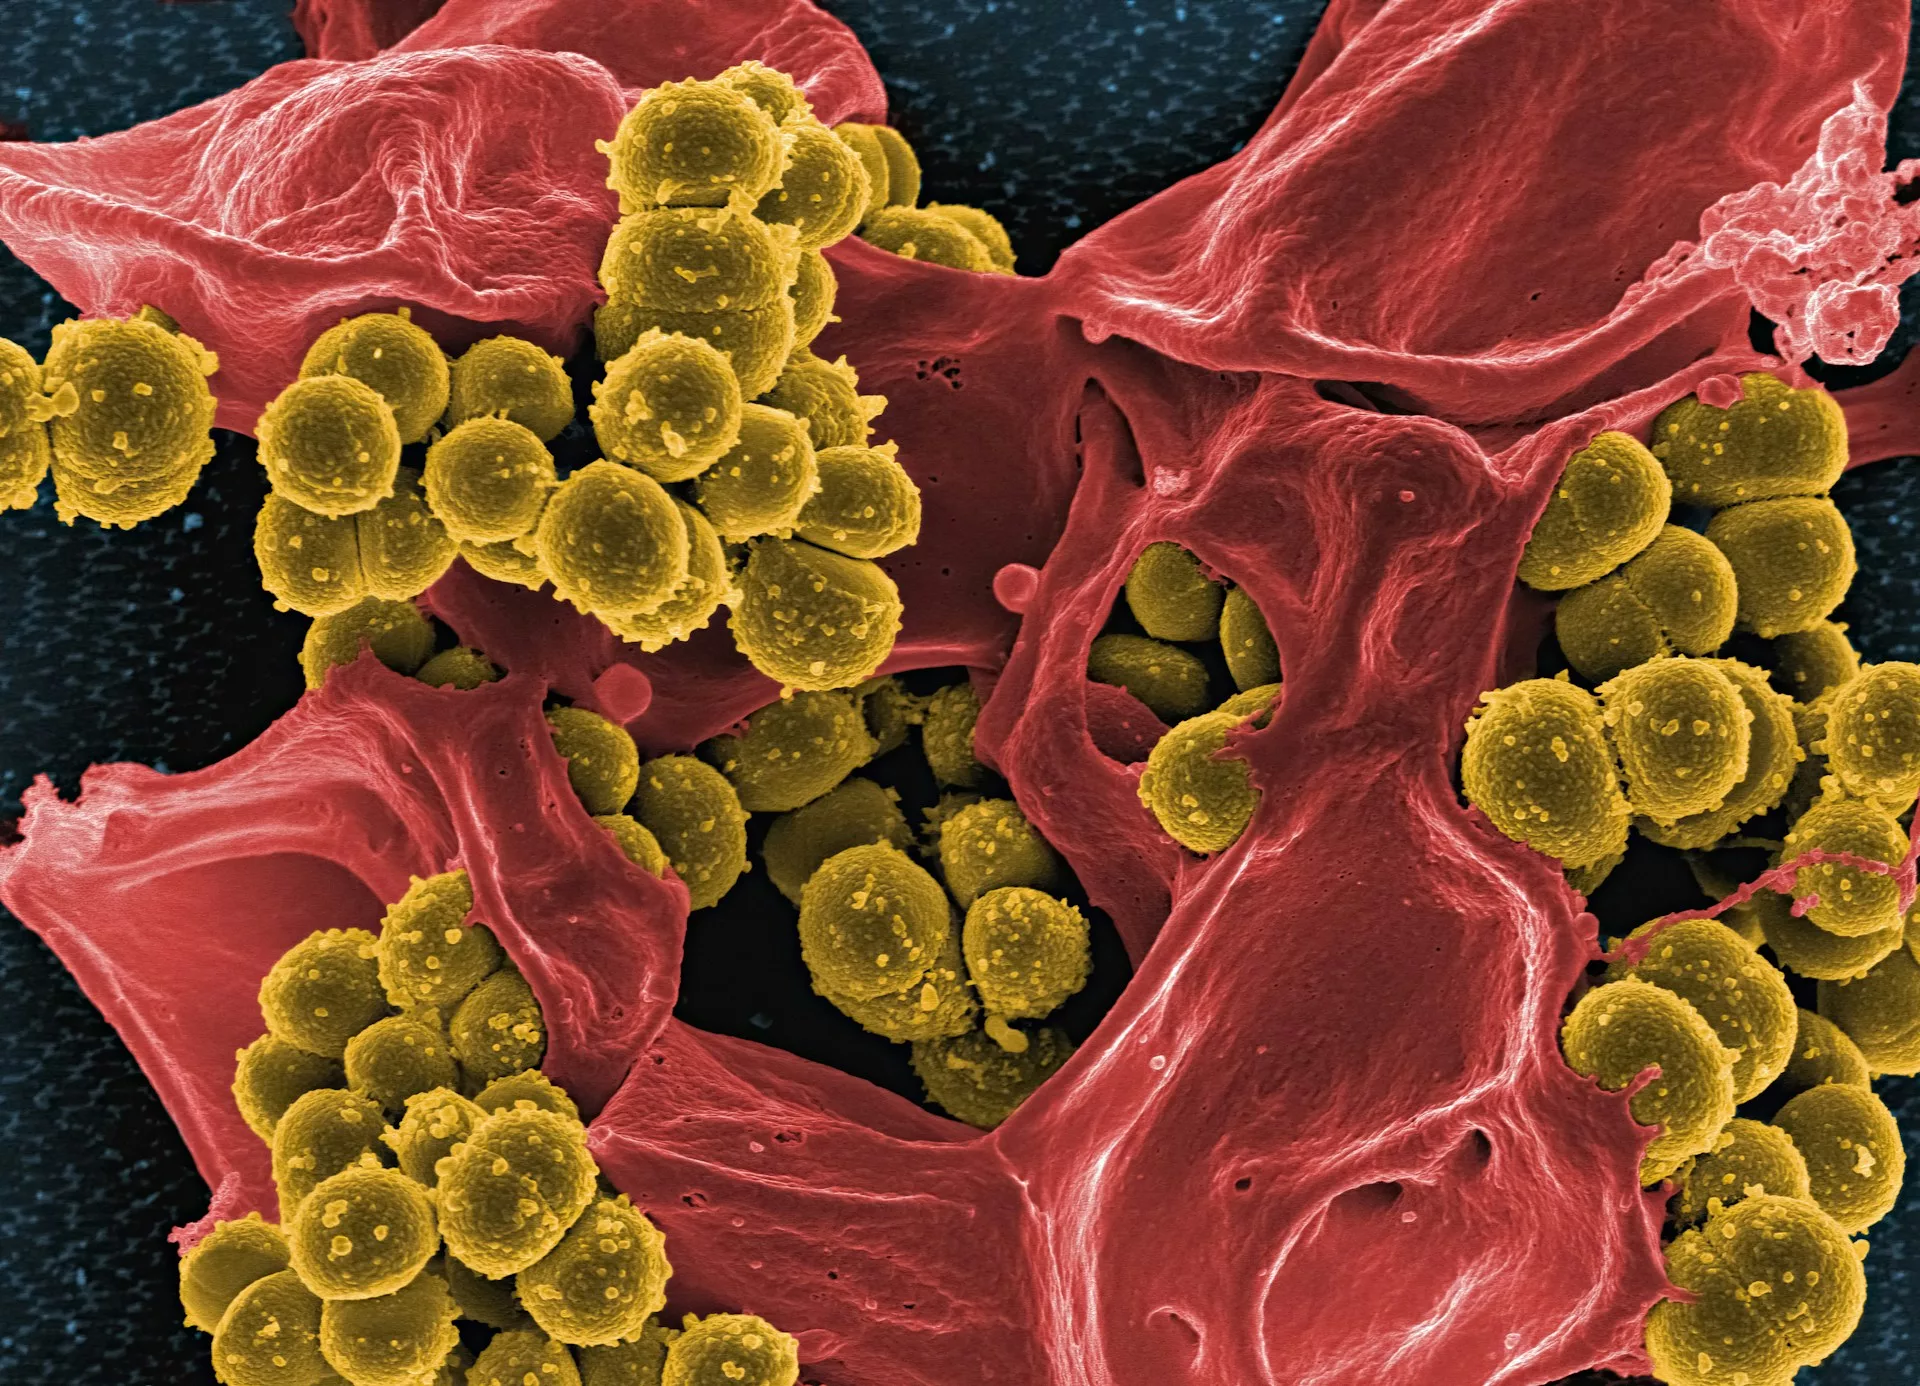 micrograph image of MRSA and a neutrophil